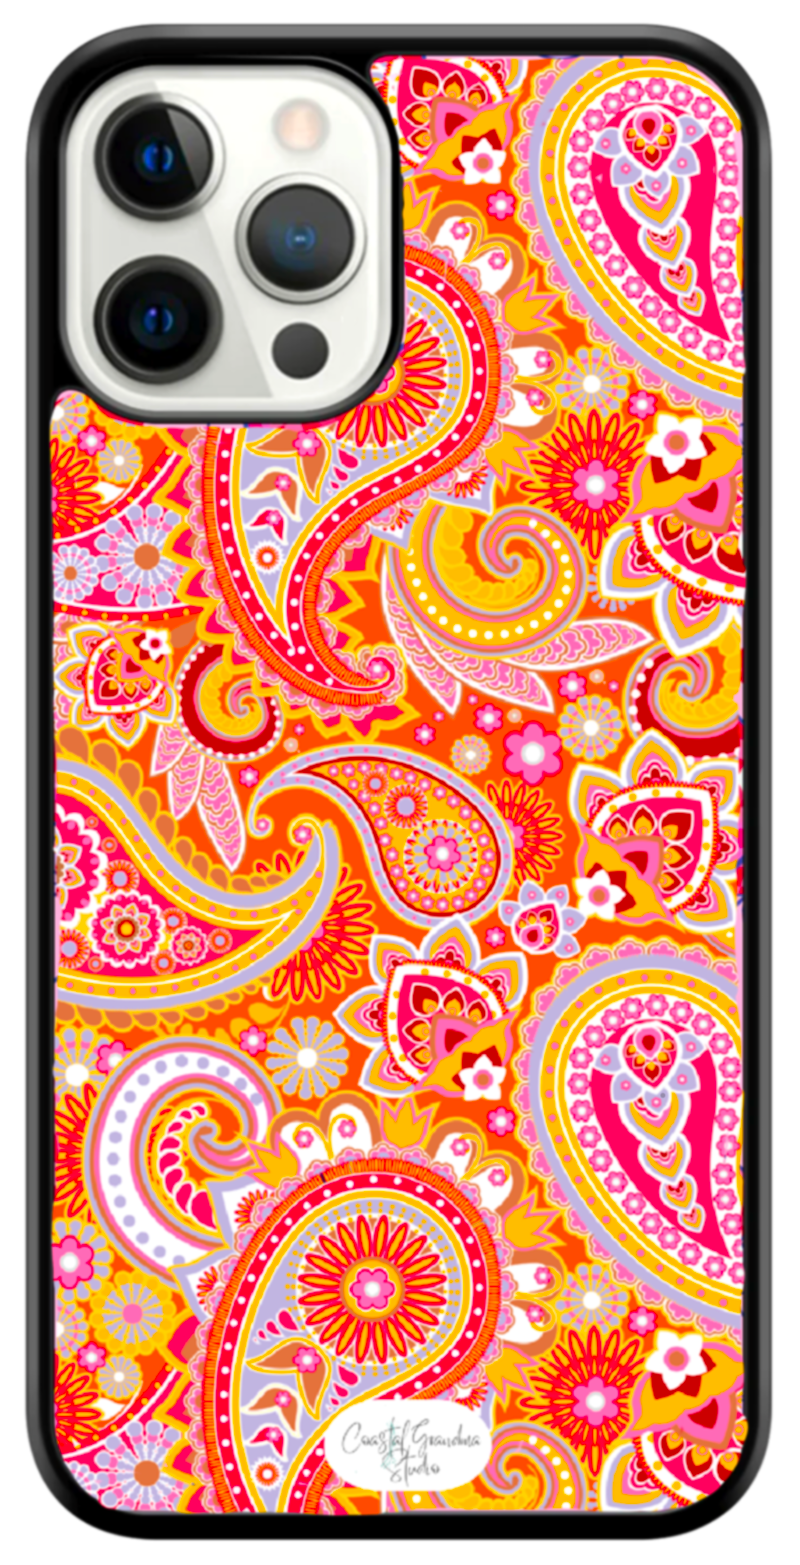 '70's Paisley! WOW! Magnet (1364-M)